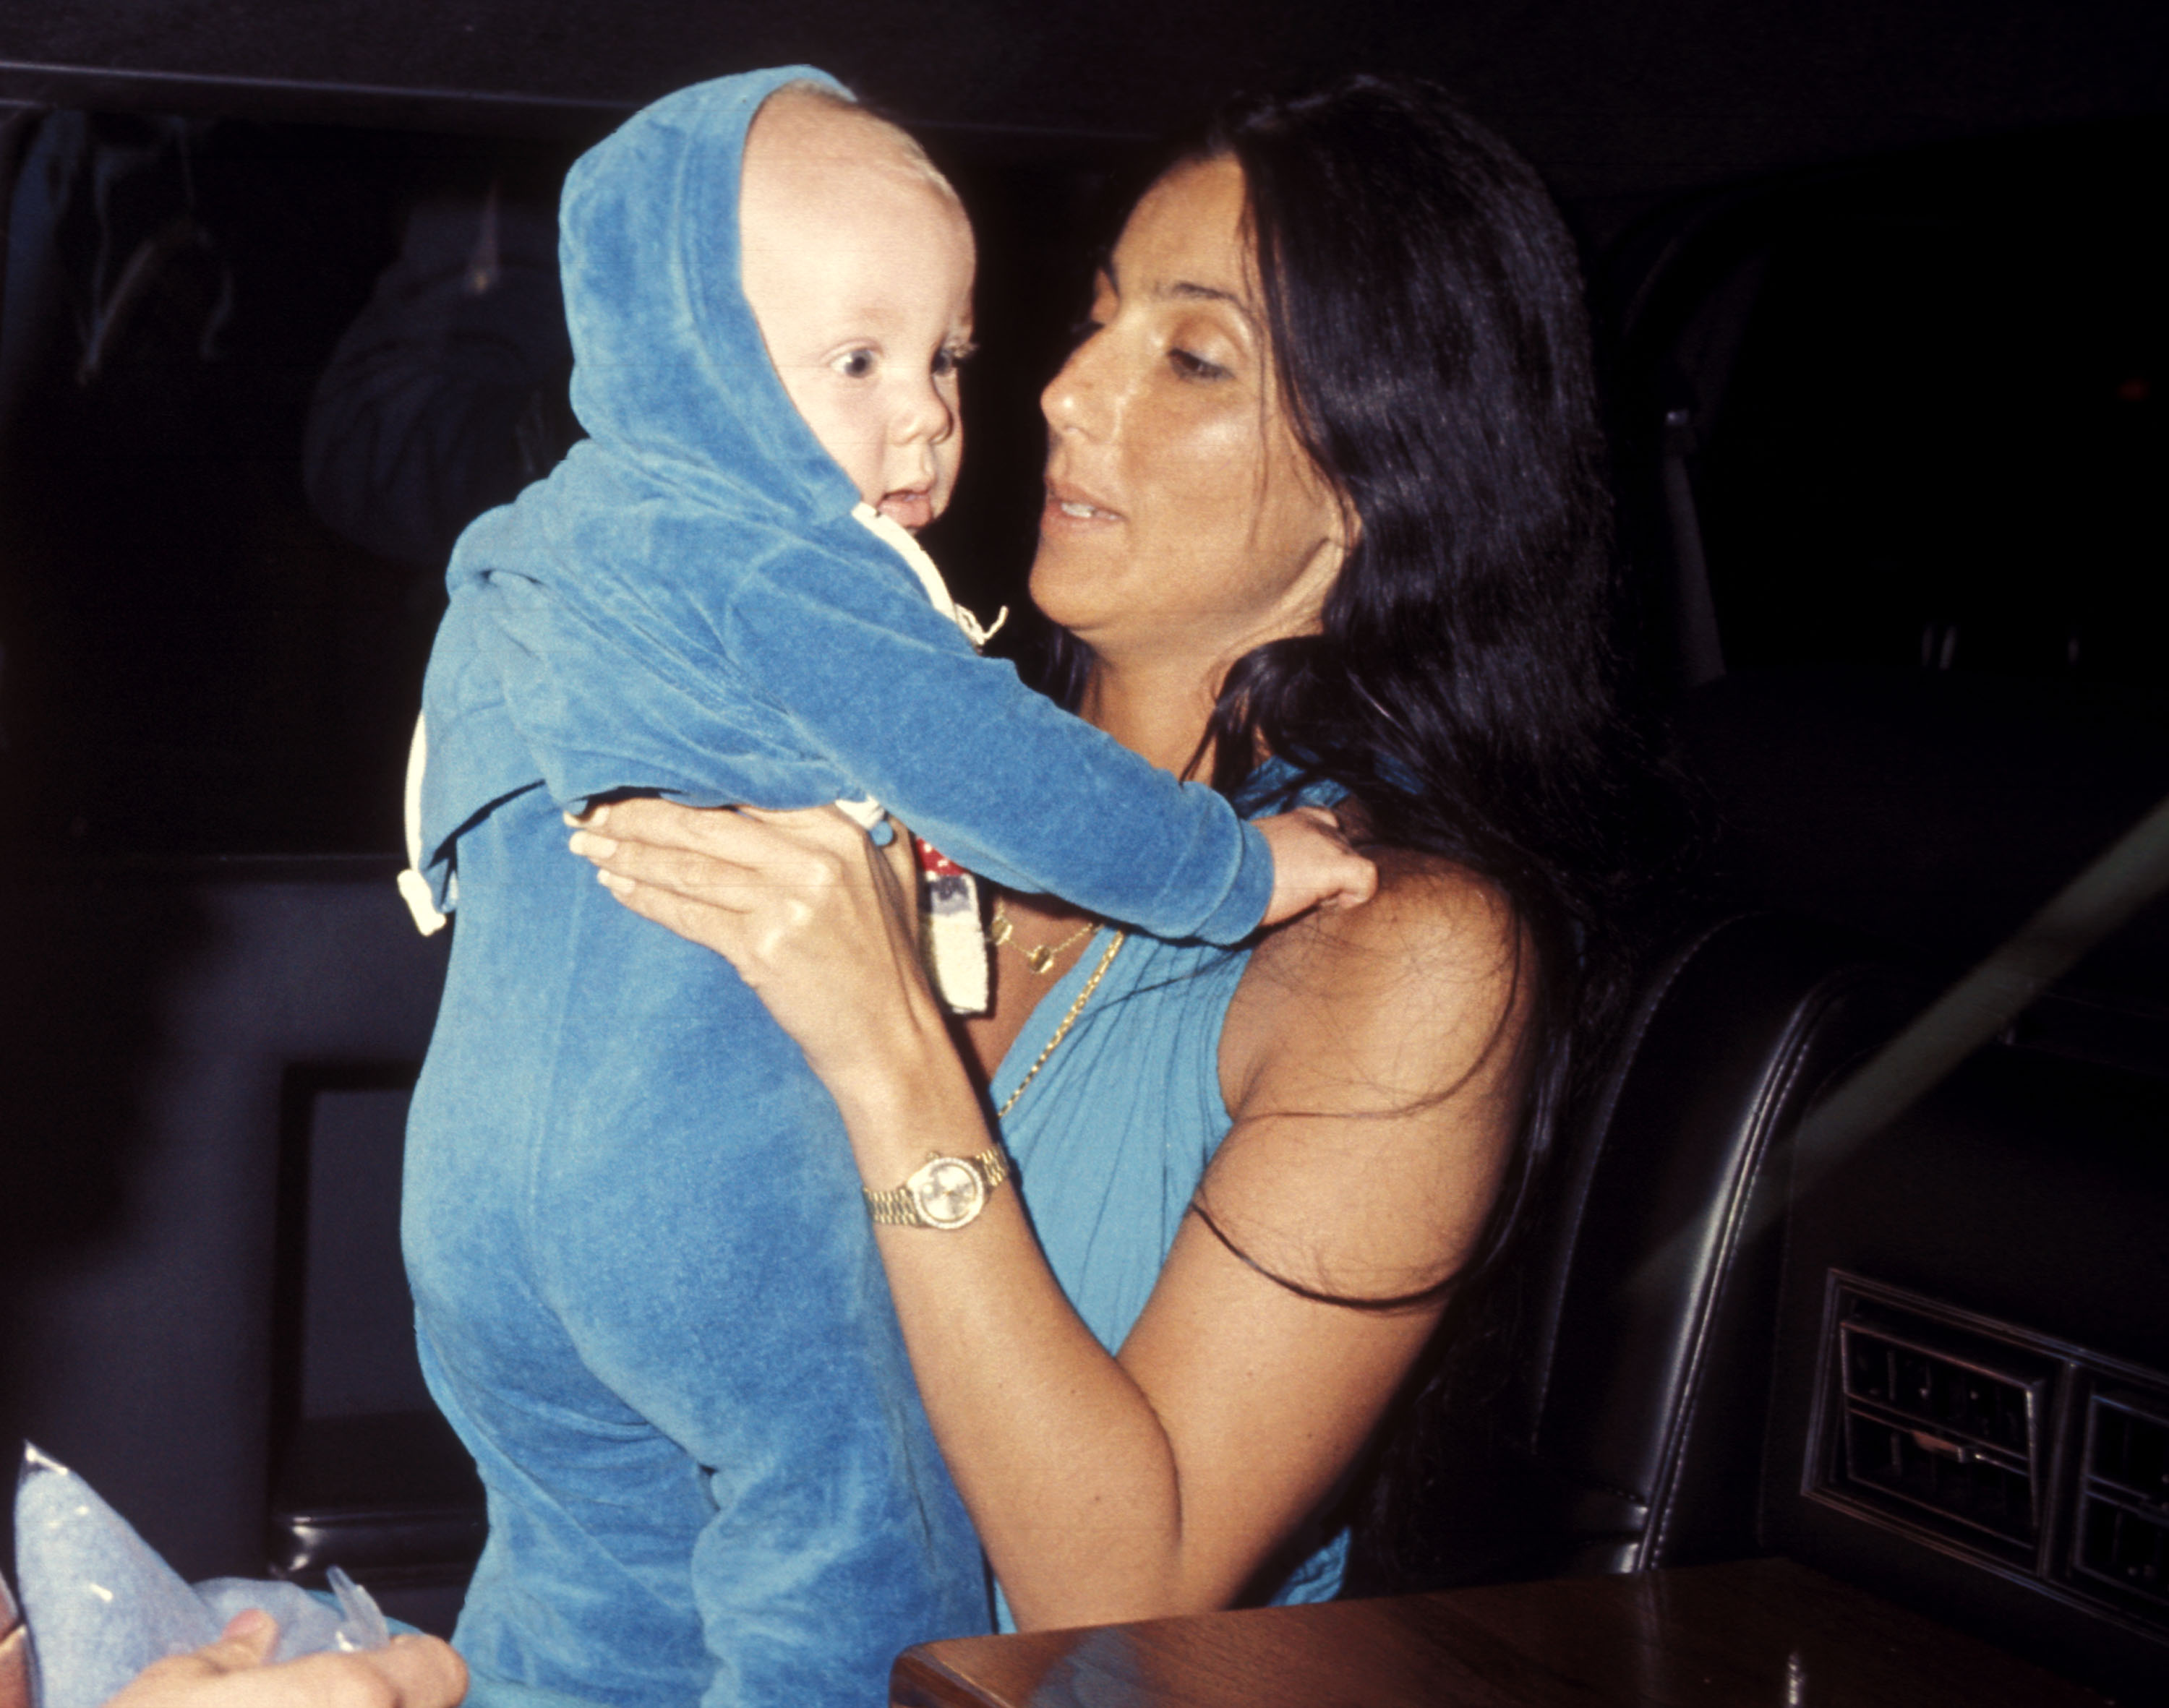 Cher and son Elijah Blue Allman on March 20, 1977 in Los Angeles, California | Source: Getty Images